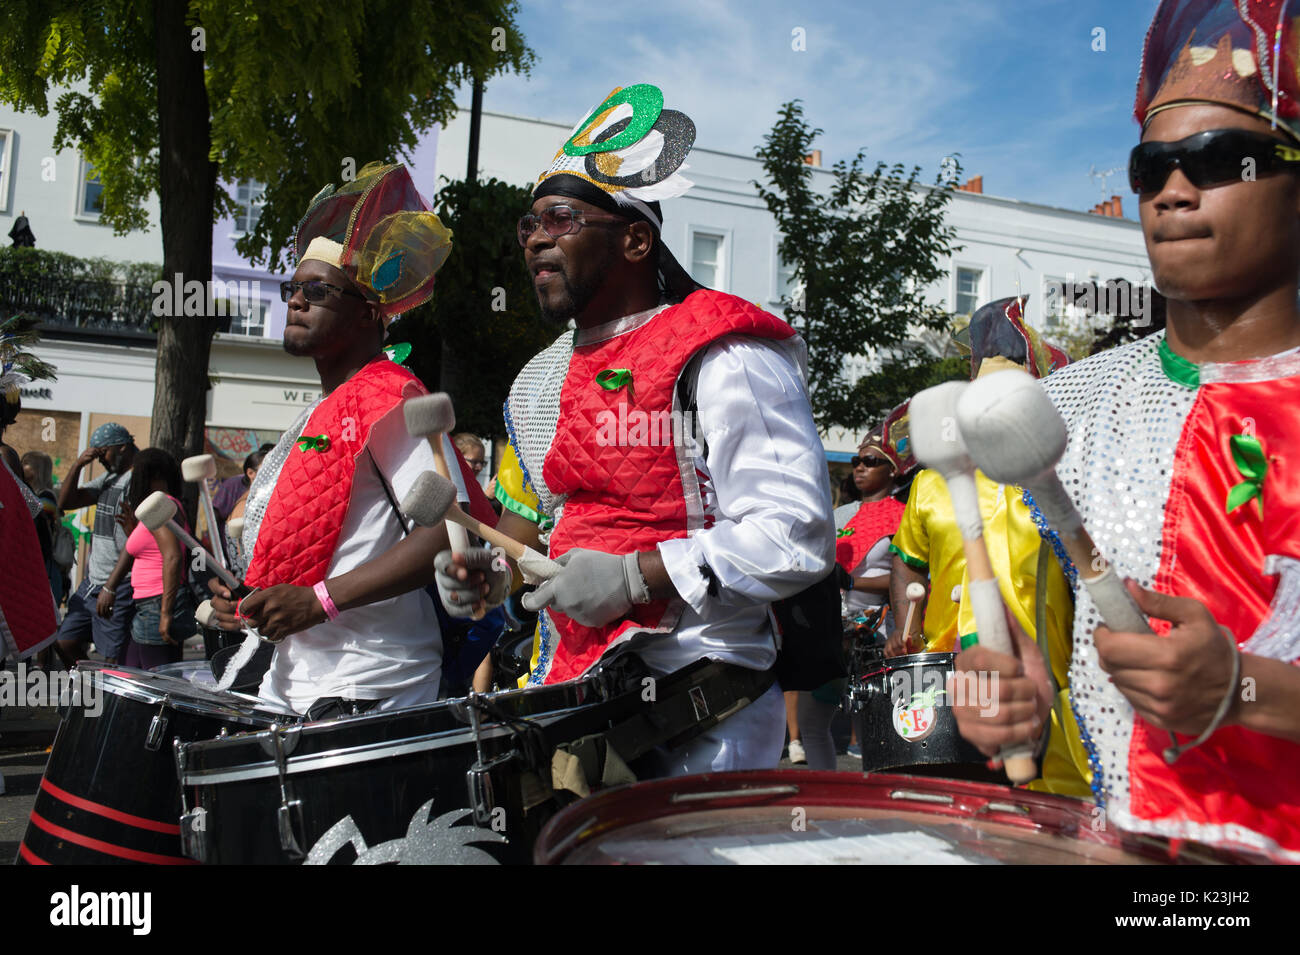 London, UK. 28th Aug, 2017. The Notting Hill Carnival 2017 parade through the streets. The carnival attracted large crowds to see the colourful costumes and to listen to the music as it paraded round the streets of Notting Hill, London. Andrew Steven Graham/Alamy Live News Stock Photo